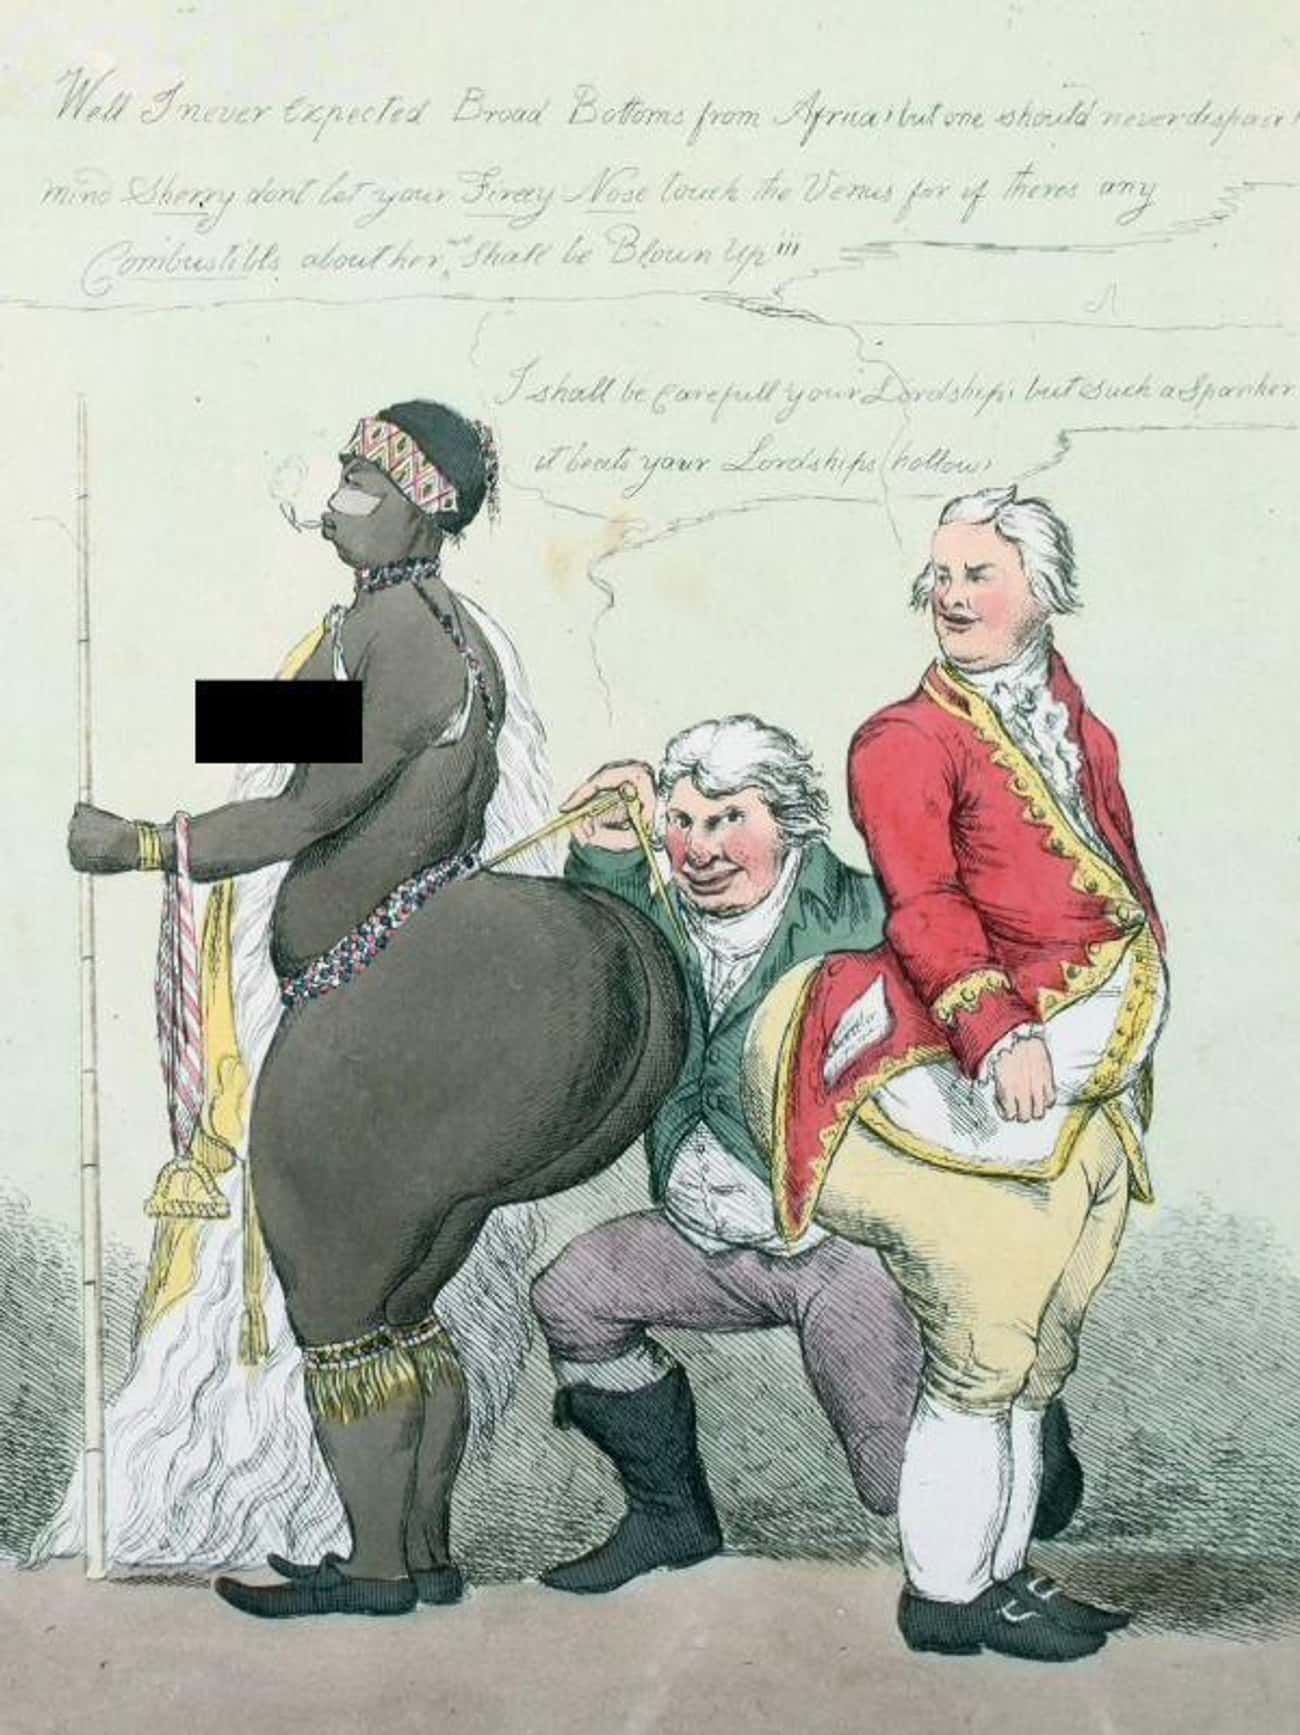 Baartman's Unusually Large Backside Stemmed From A Medical Condition